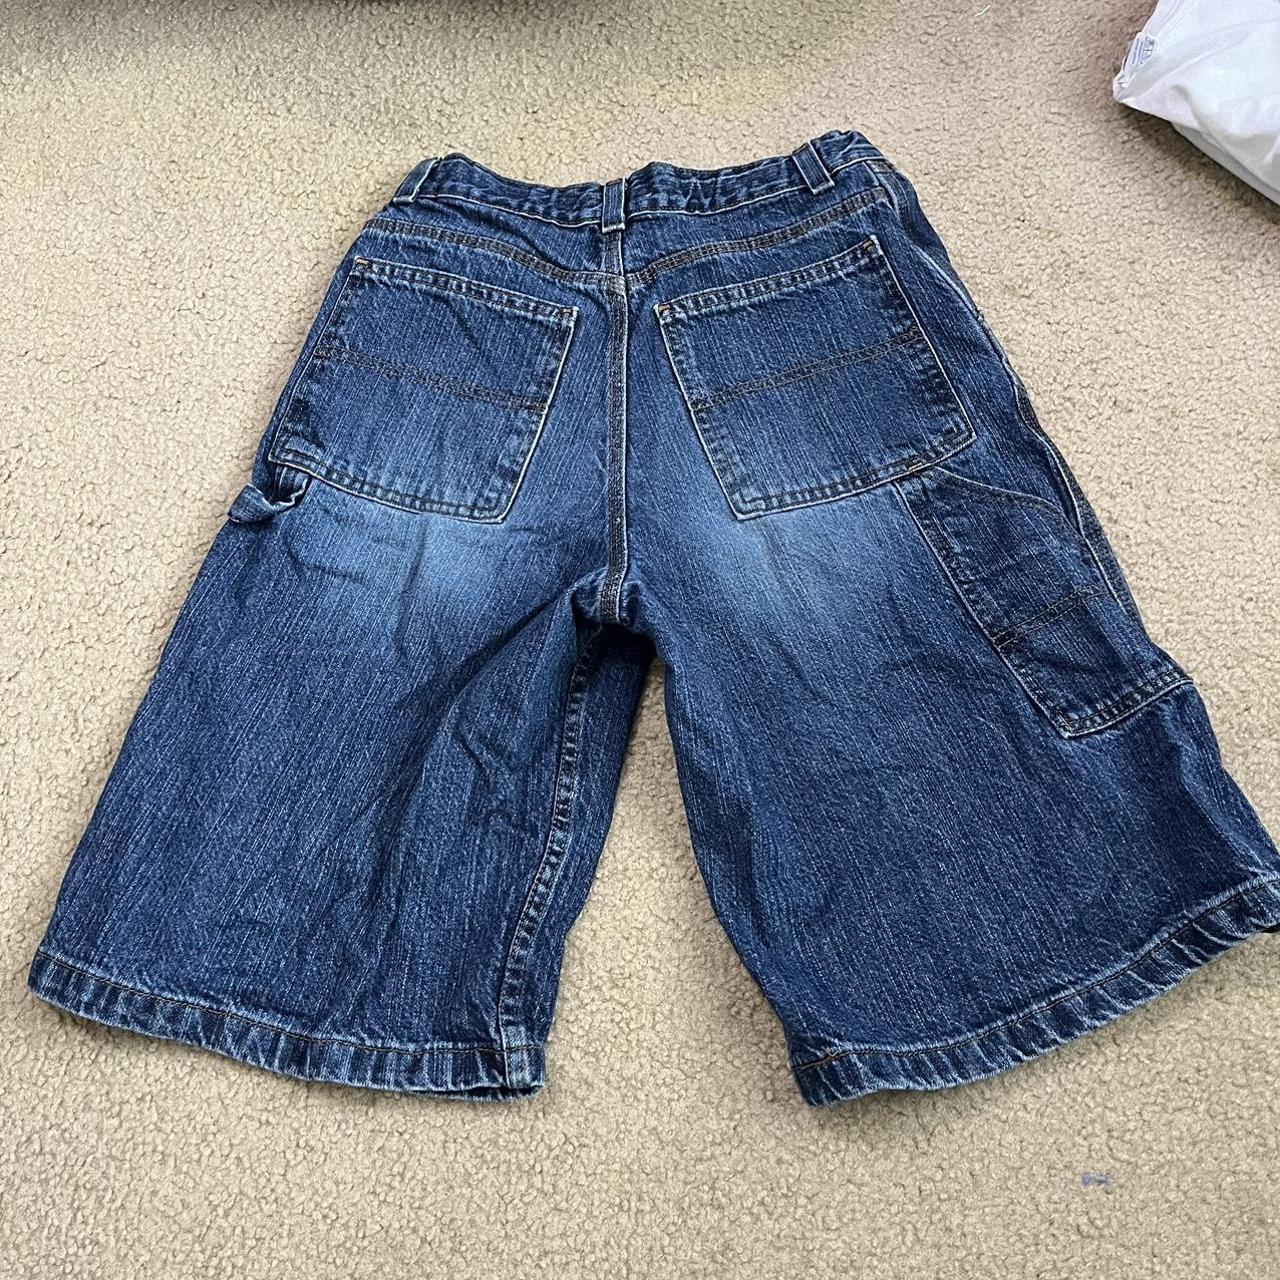 Faded Glory kids jorts size 18 thrifted never worn... - Depop